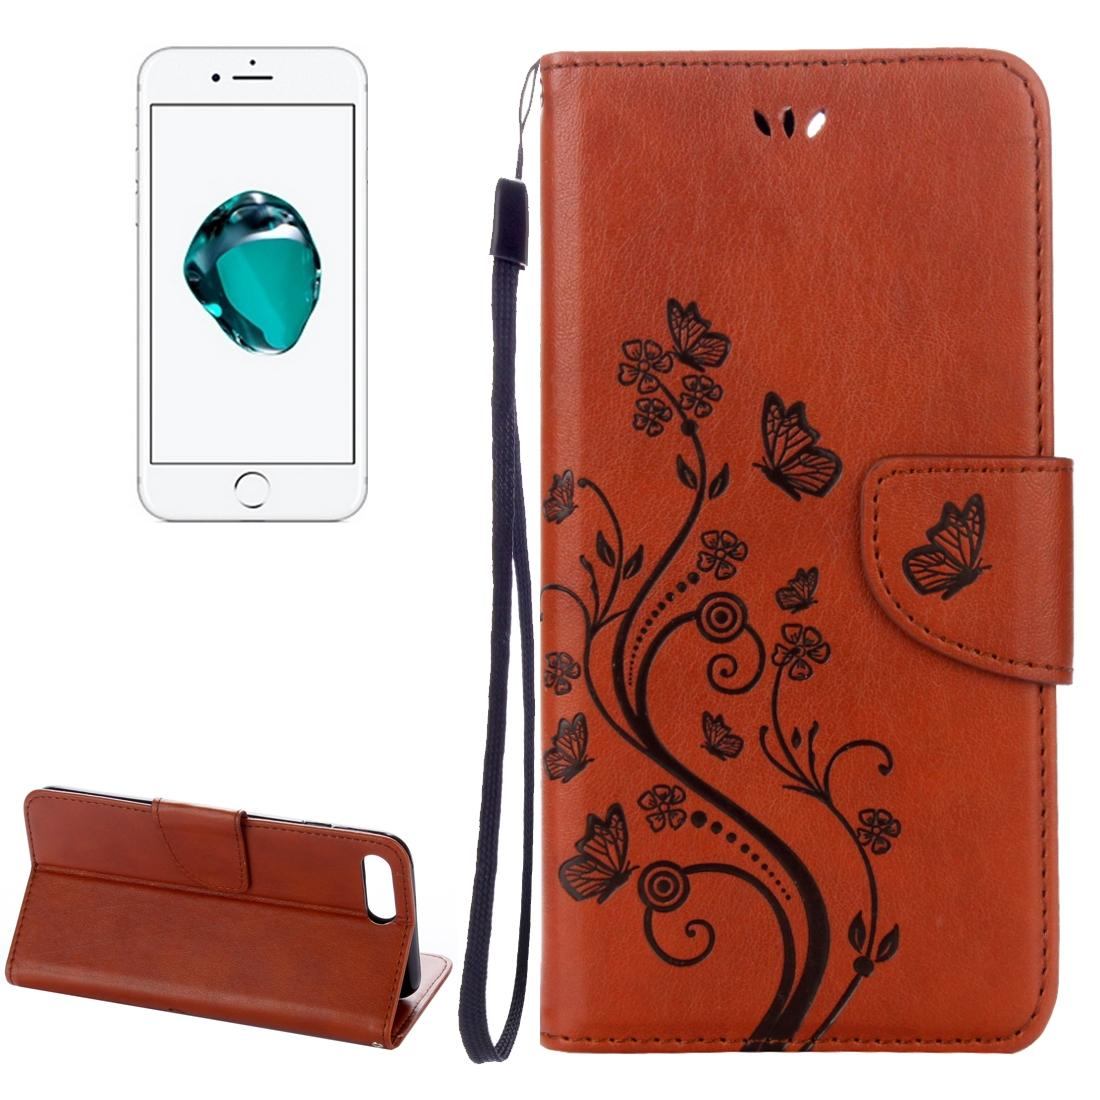 For iPhone 8 PLUS,7 PLUS Wallet Case,Butterflies Emboss Leather Cover,Coffee